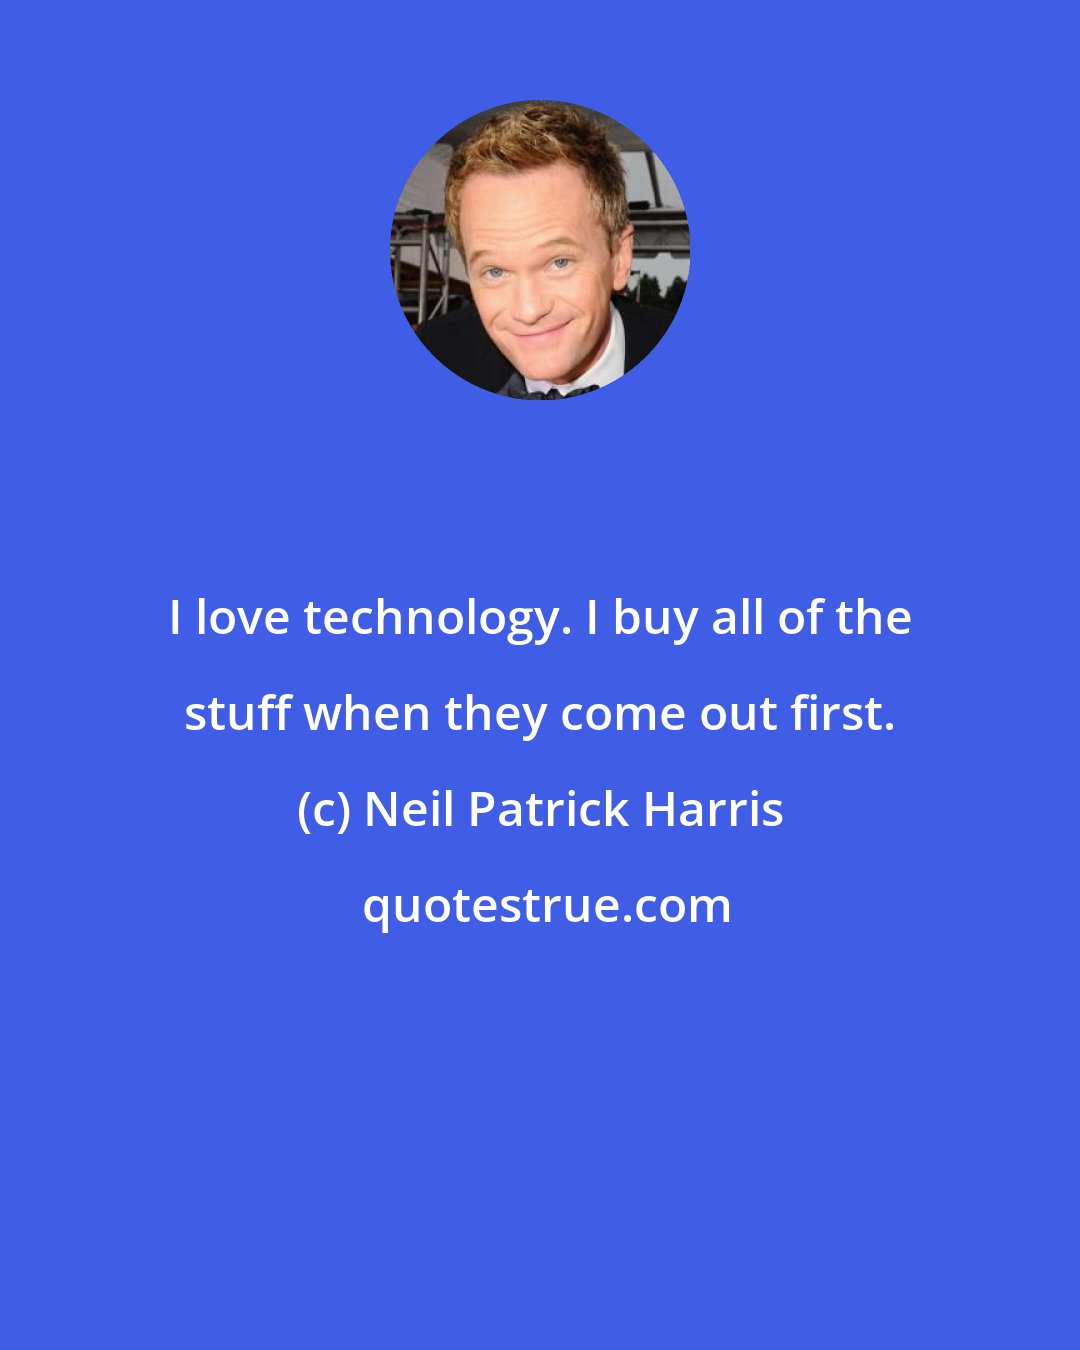 Neil Patrick Harris: I love technology. I buy all of the stuff when they come out first.